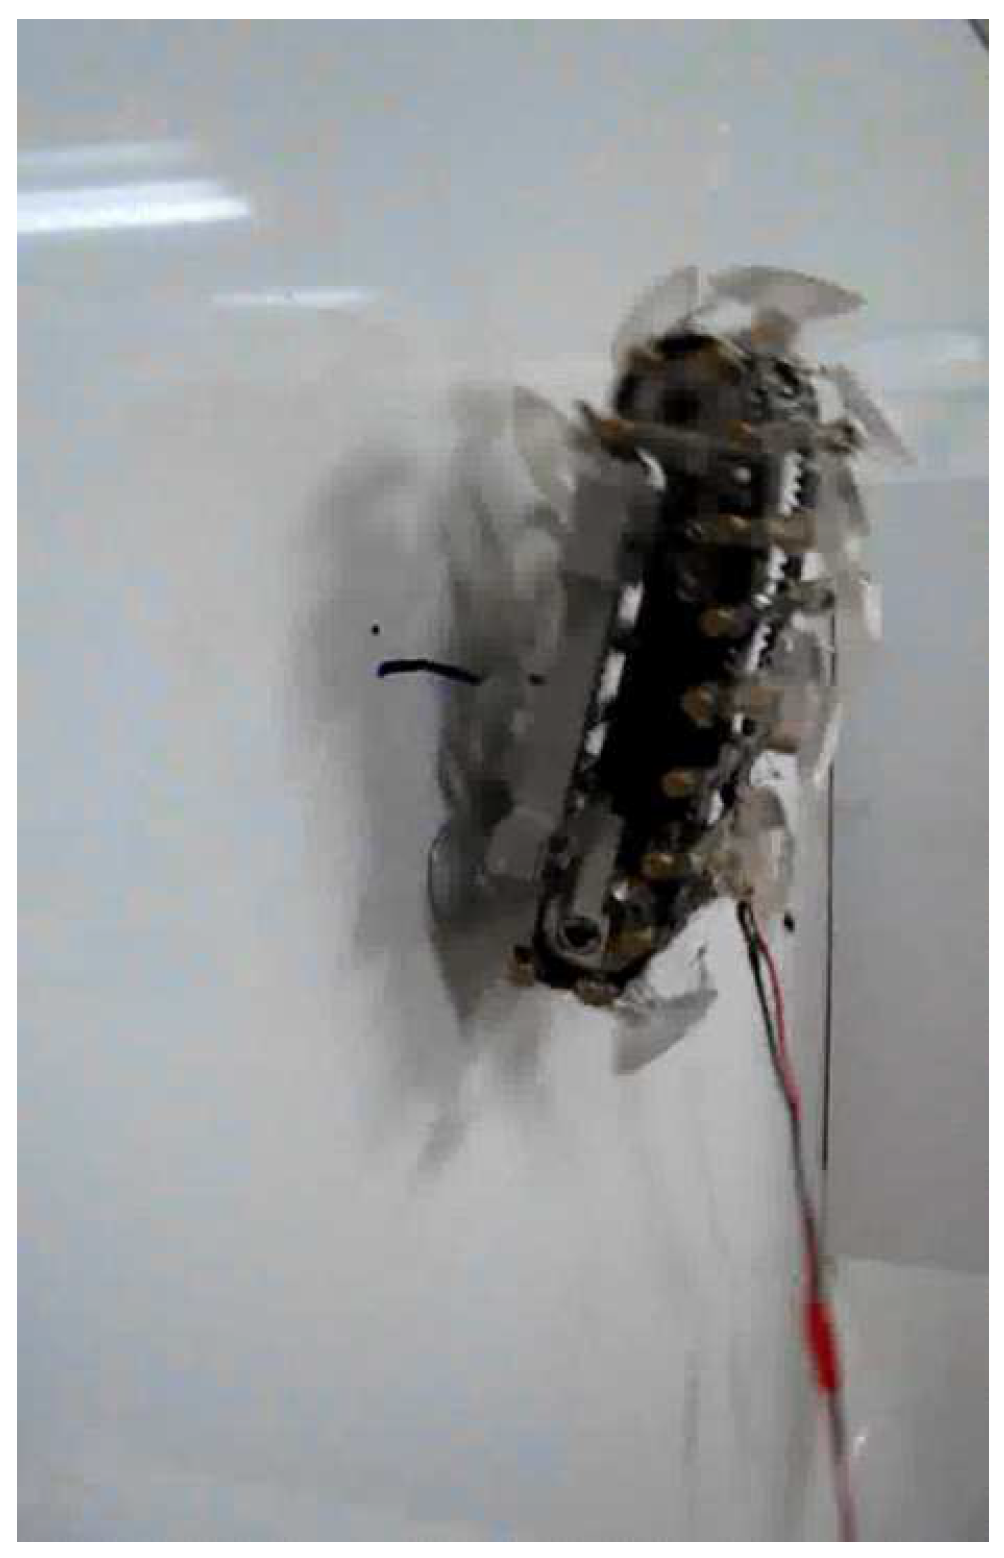 Robotics | Free Full-Text | A Pressing Attachment Approach for a  Wall-Climbing Robot Utilizing Passive Suction Cups